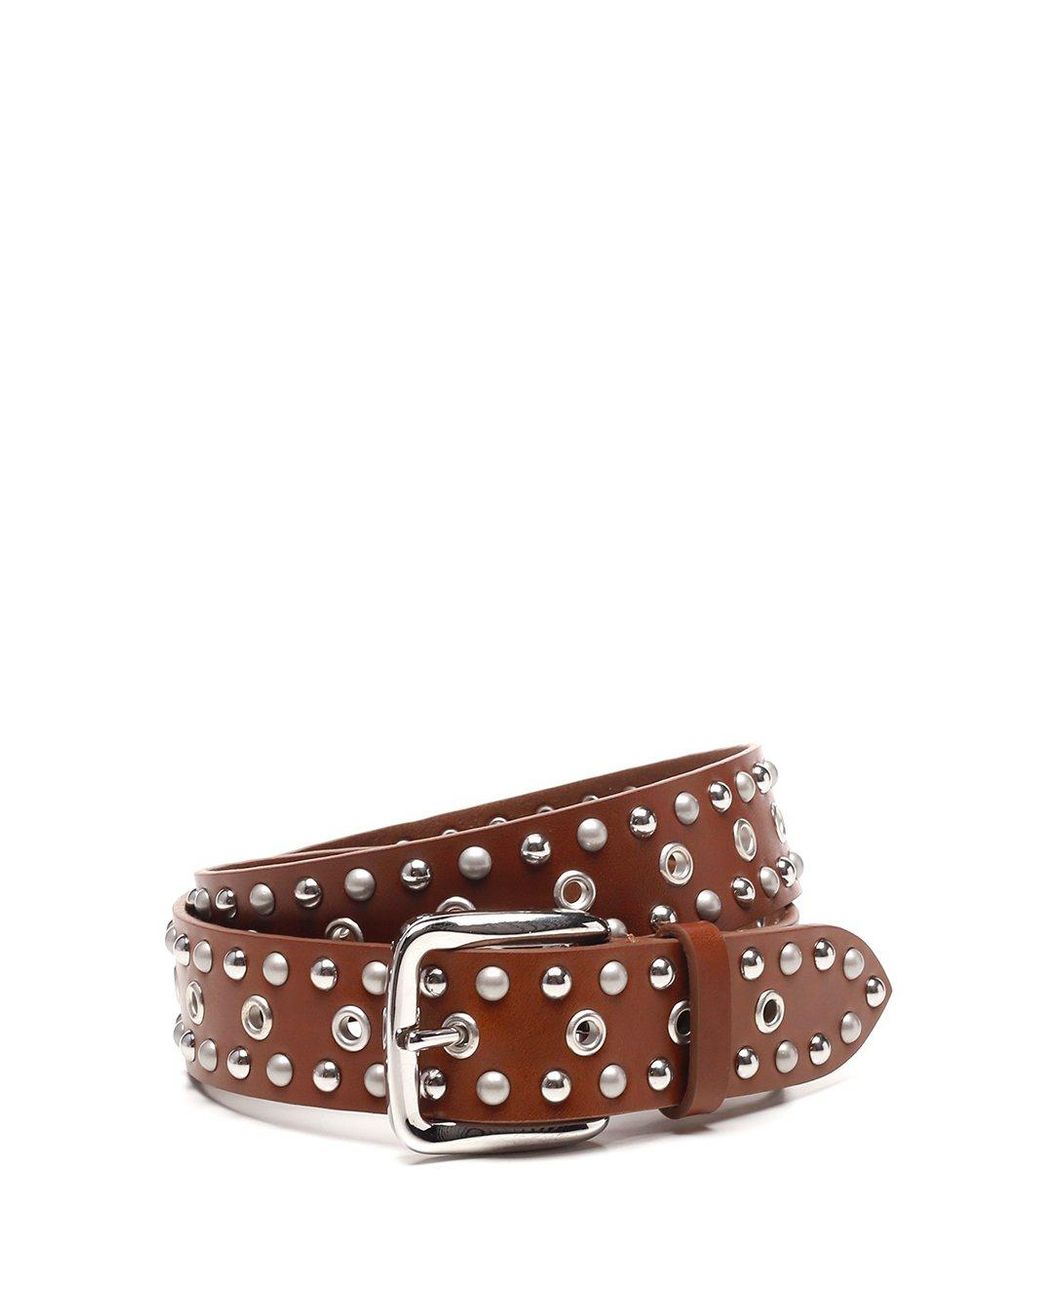 Isabel Marant Leather Rica Studded Belt in Brown - Lyst